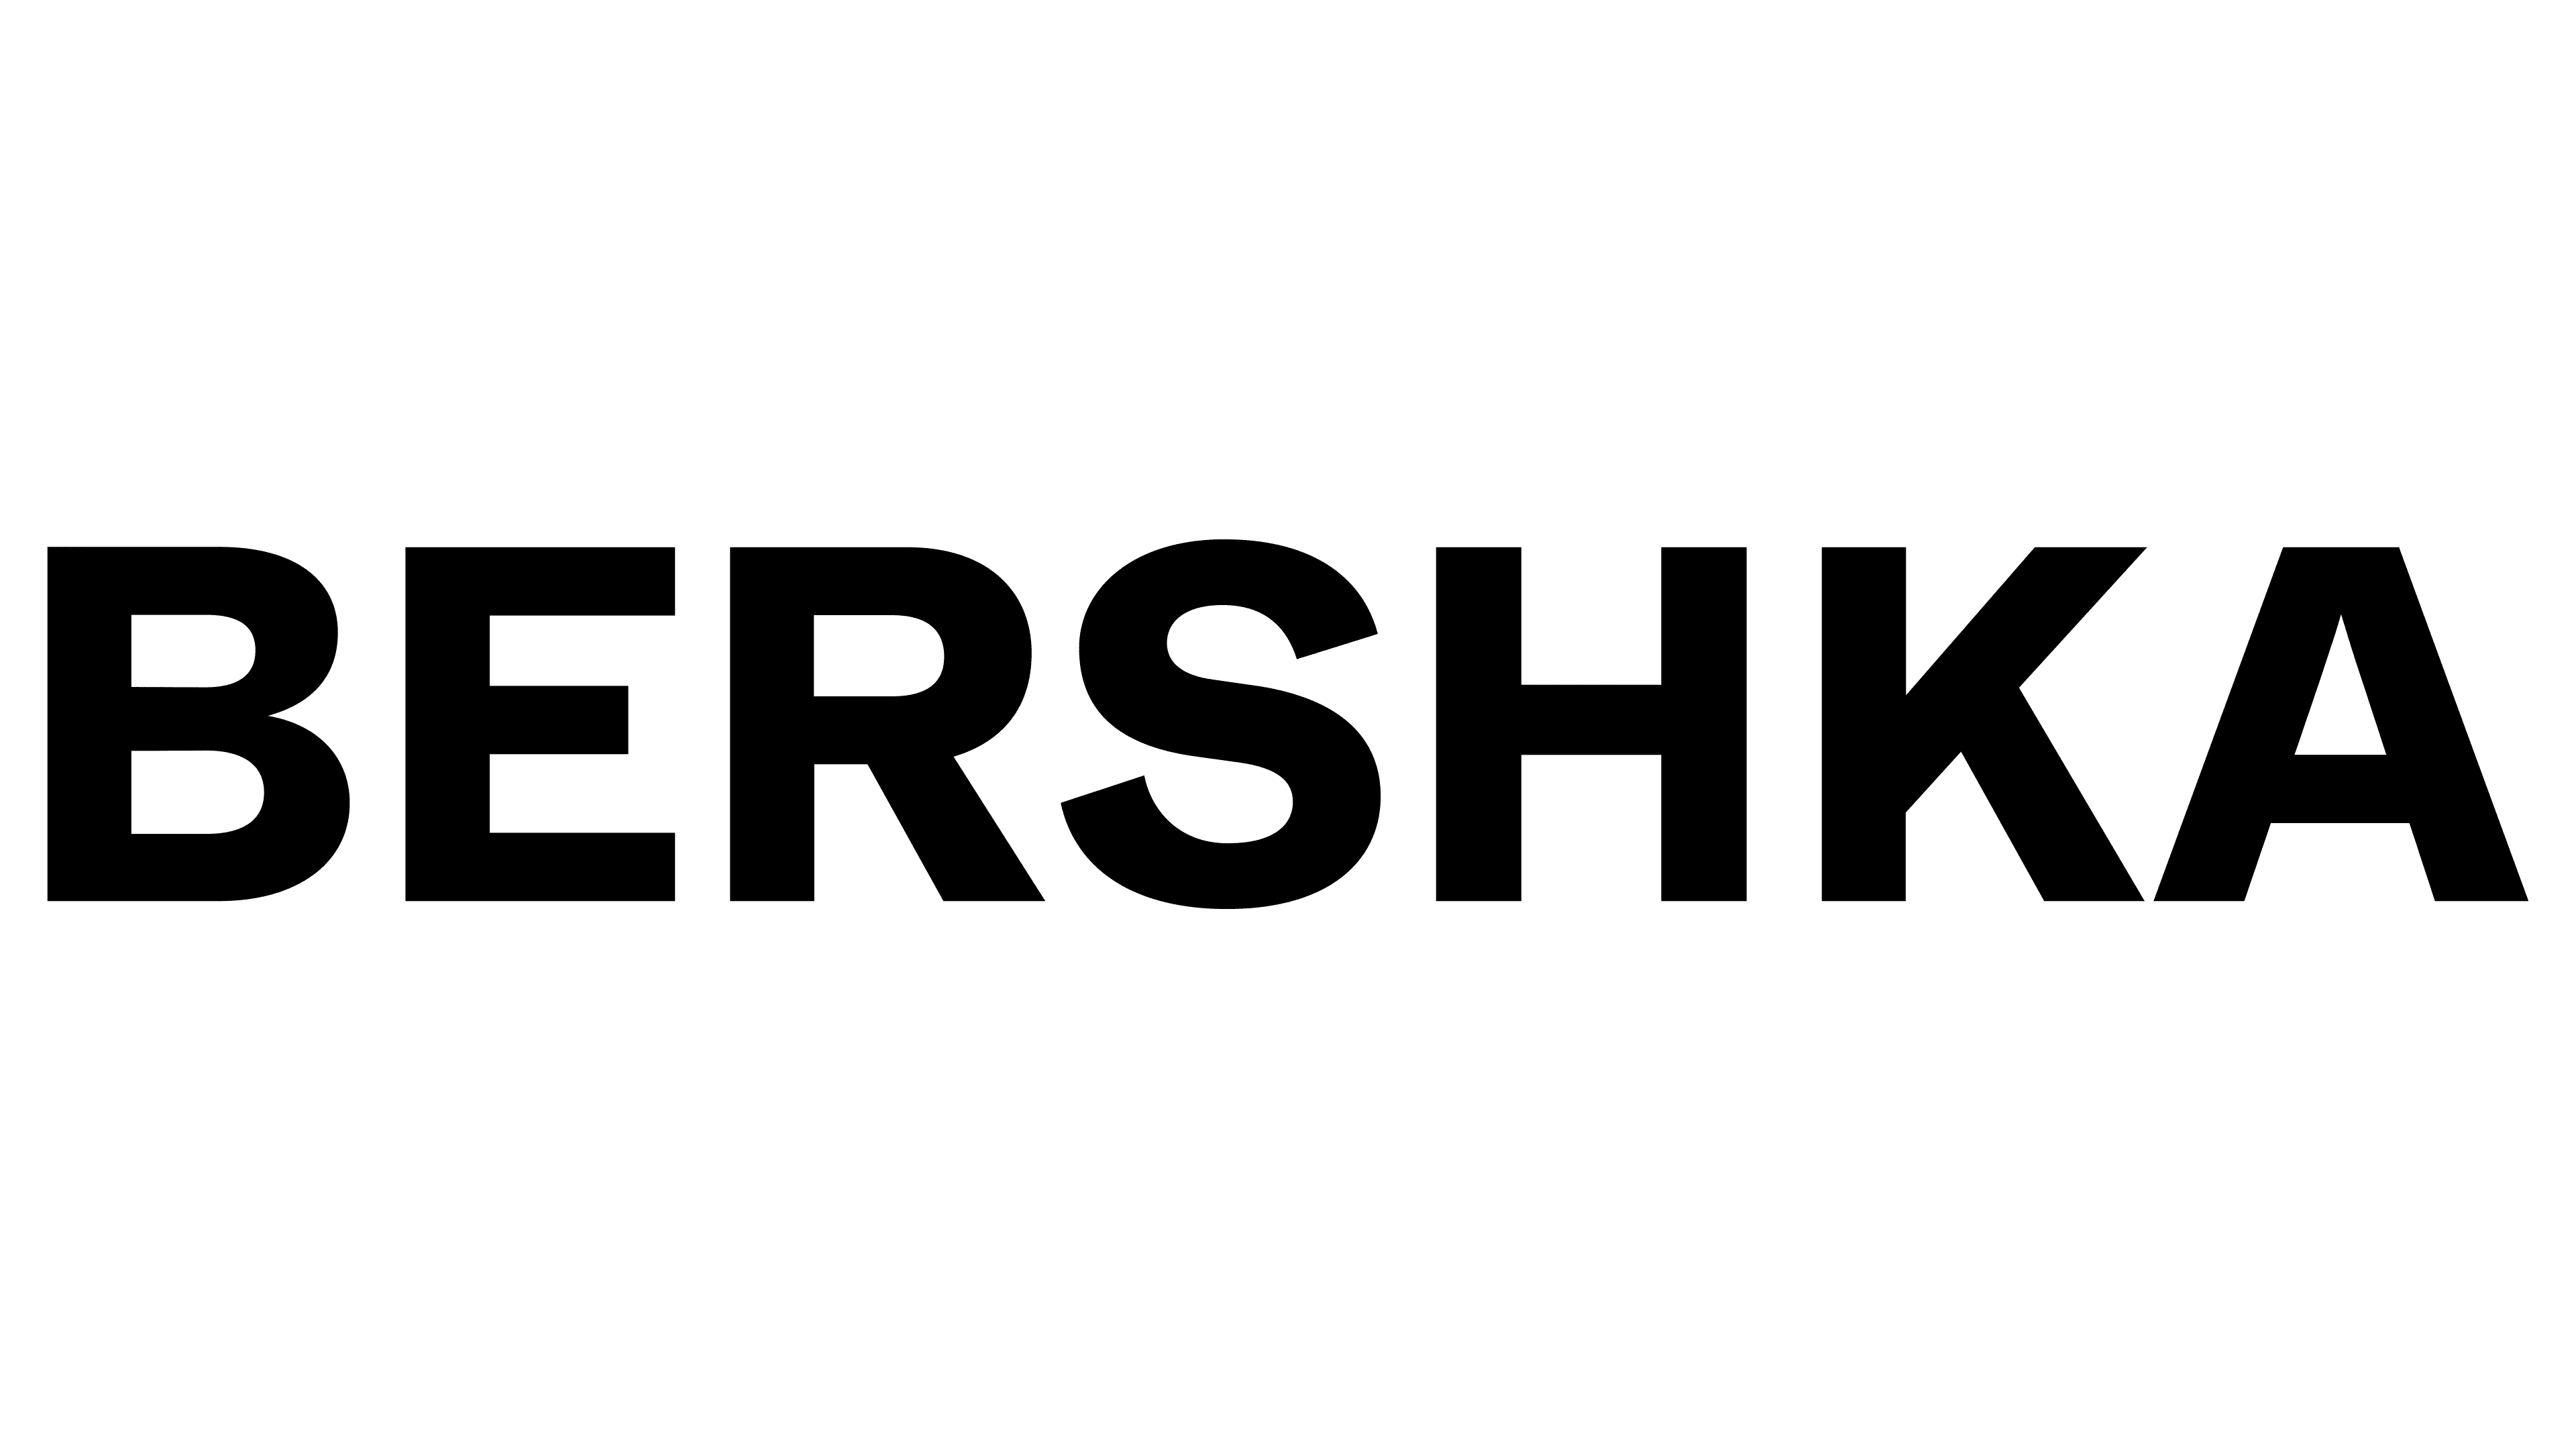 Bershka Brand Gets a New Logo for its 25th Anniversary